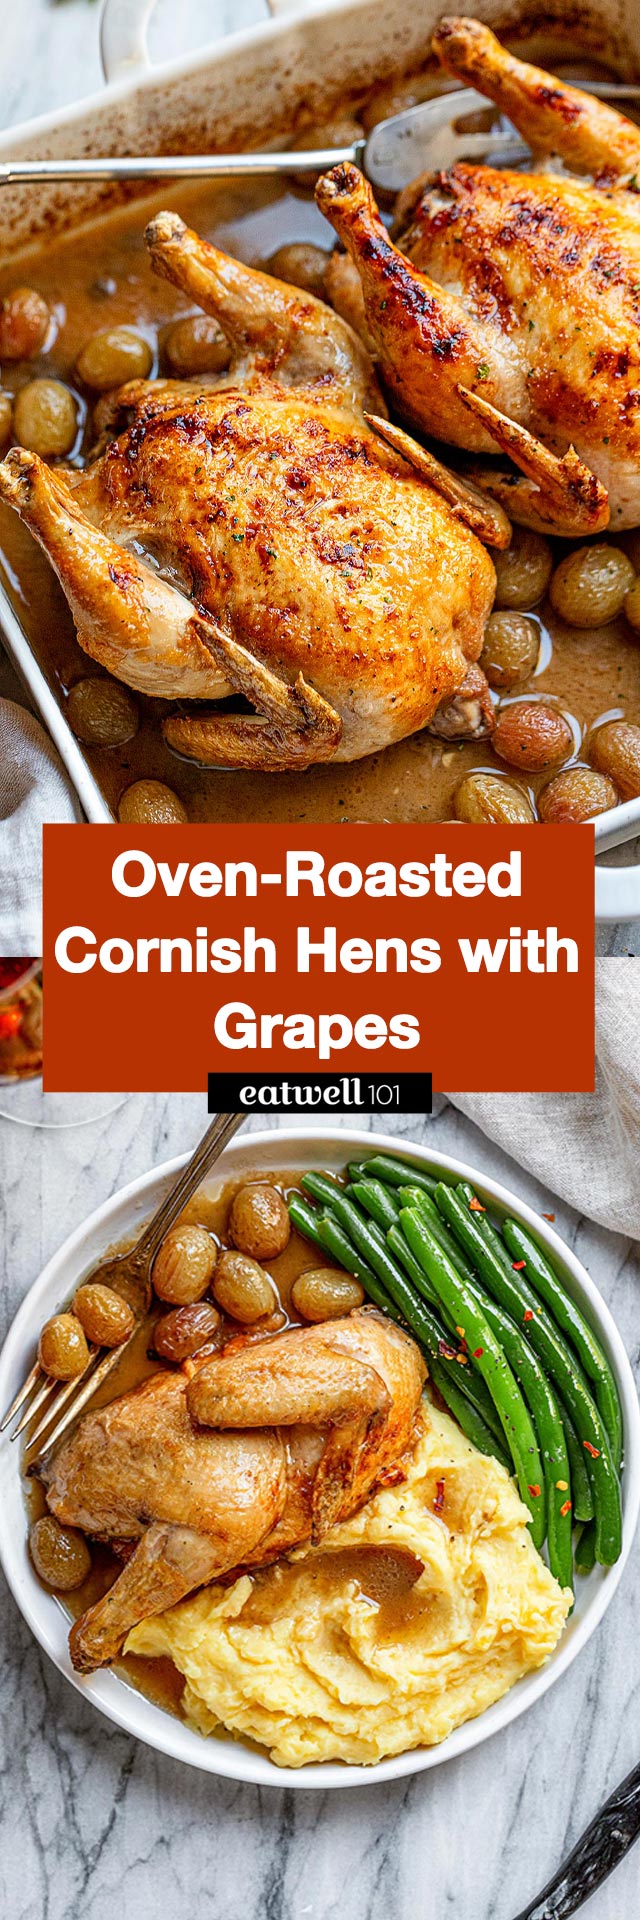 Oven-Roasted Cornish Hens with Grapes - #cornishhen #recipe #eatwell101 - This oven roasted cornish hens recipe packs a maximum of flavors with only few ingredients. The baked cornish hens will be your new favorite recipe for holiday dinners or to impress your dinner party guests. 